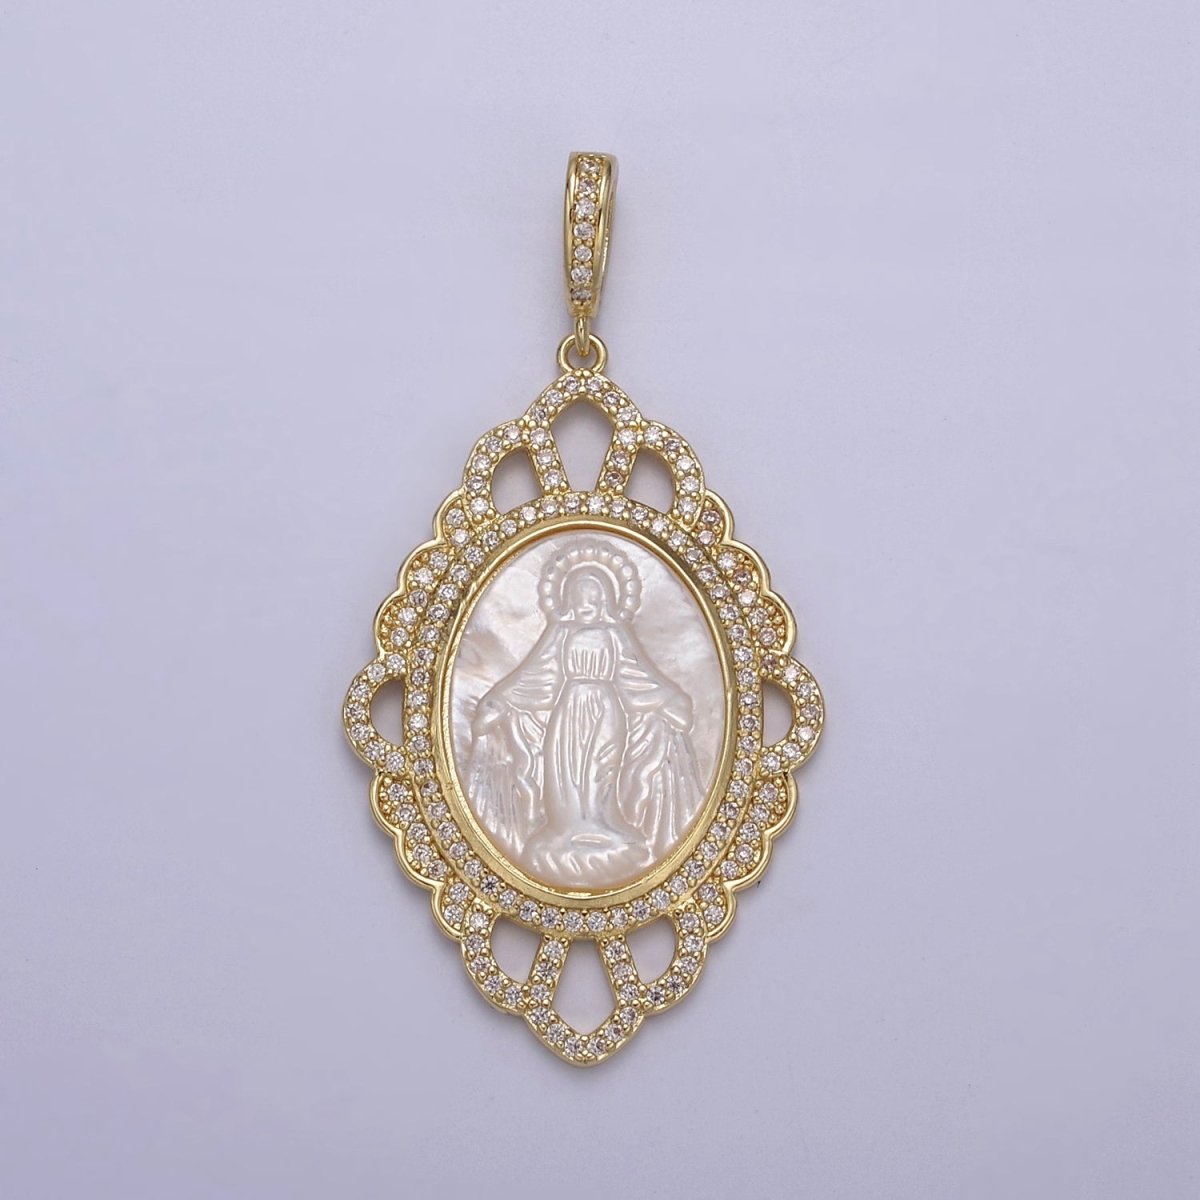 Vintage Pearl Medallion Virgin Mary / Miraculous Lady Guadalupe Pendant for Statement Jewelry Necklace Supply N-565 N-566 - DLUXCA